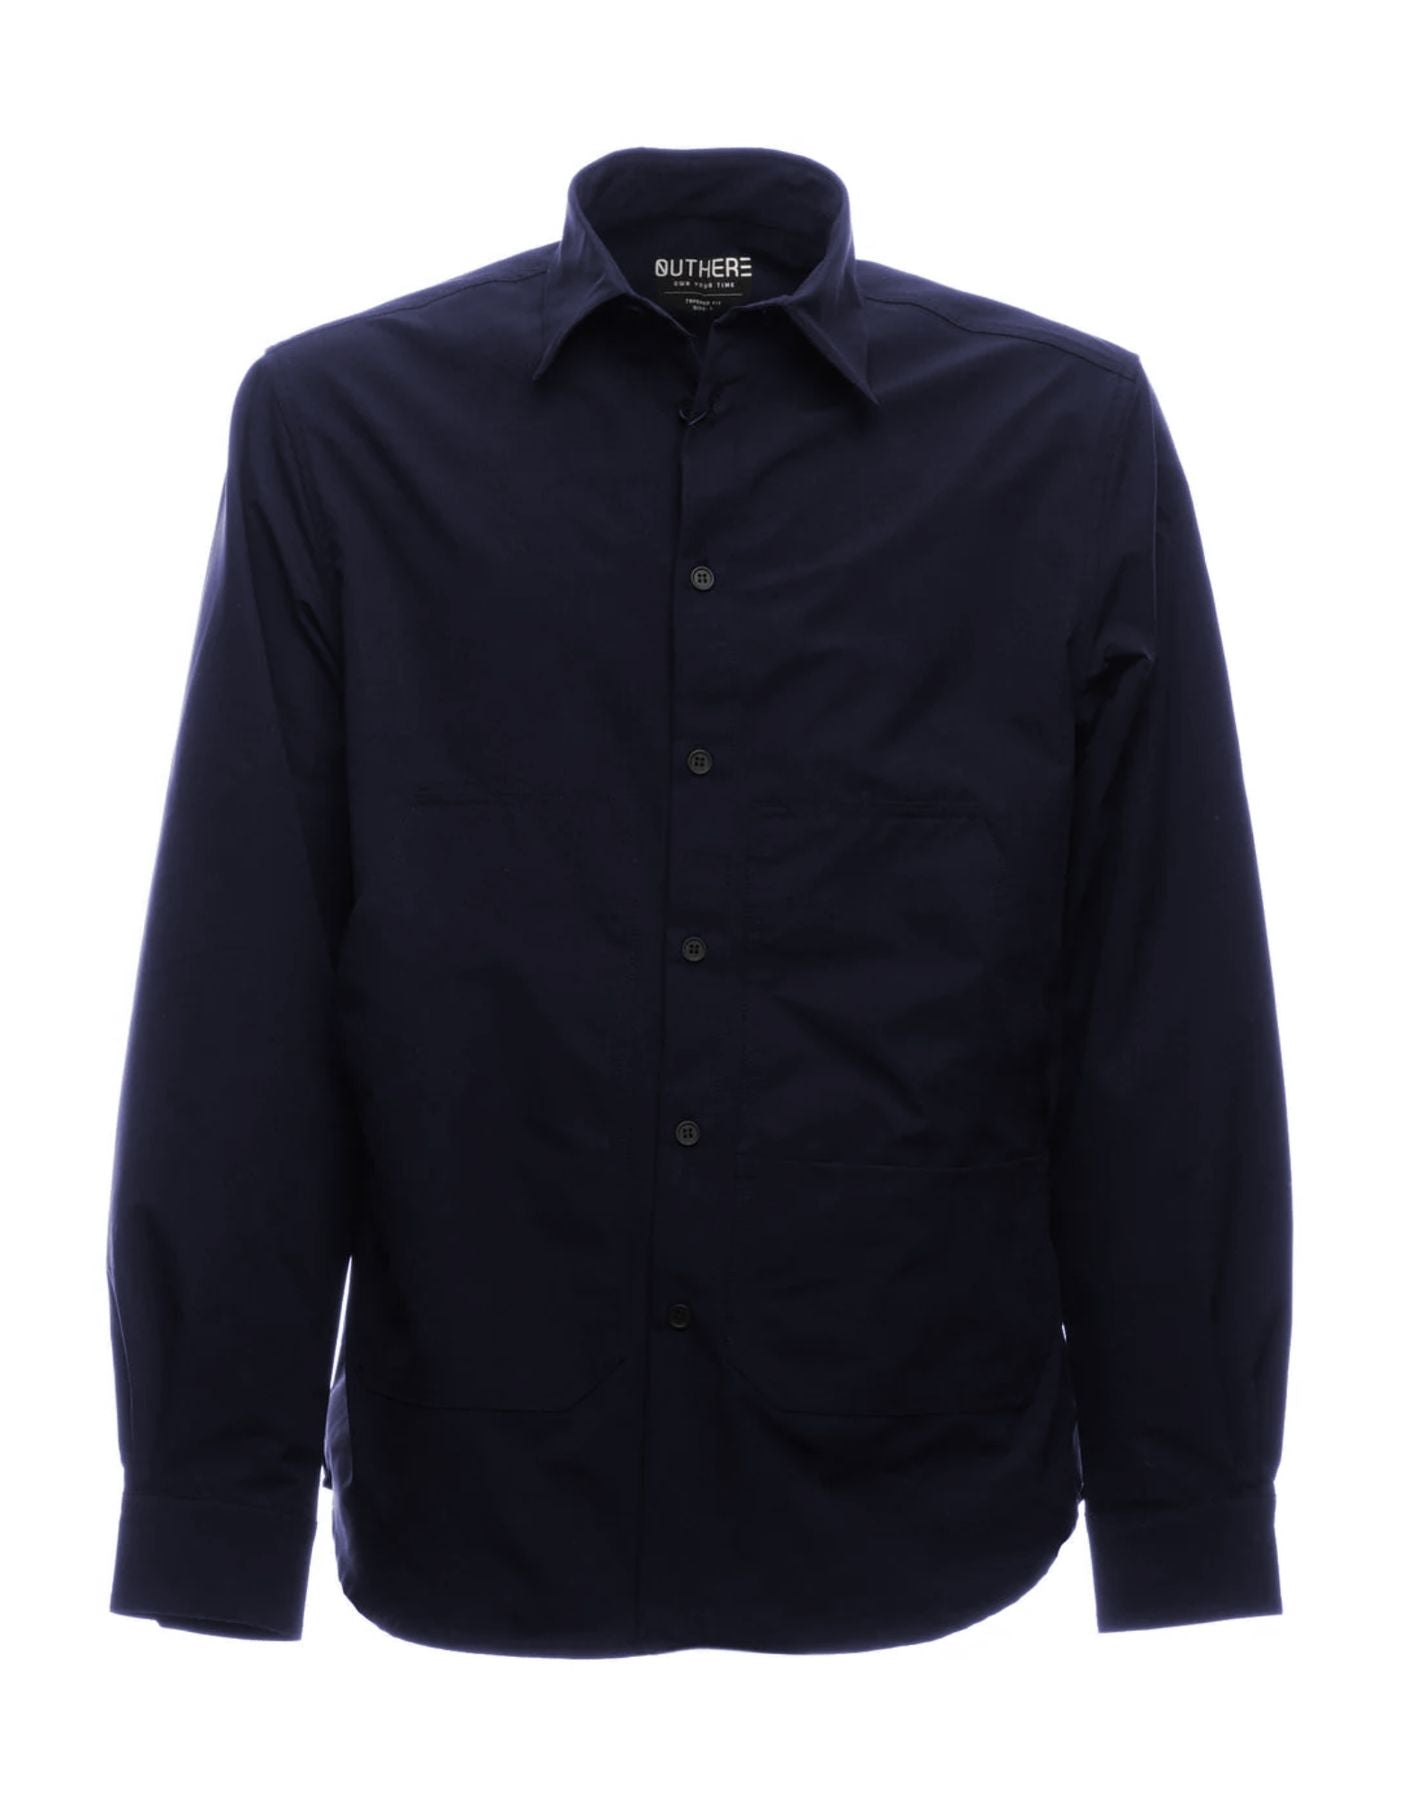 Chemise man eotm142ag42 marine out there